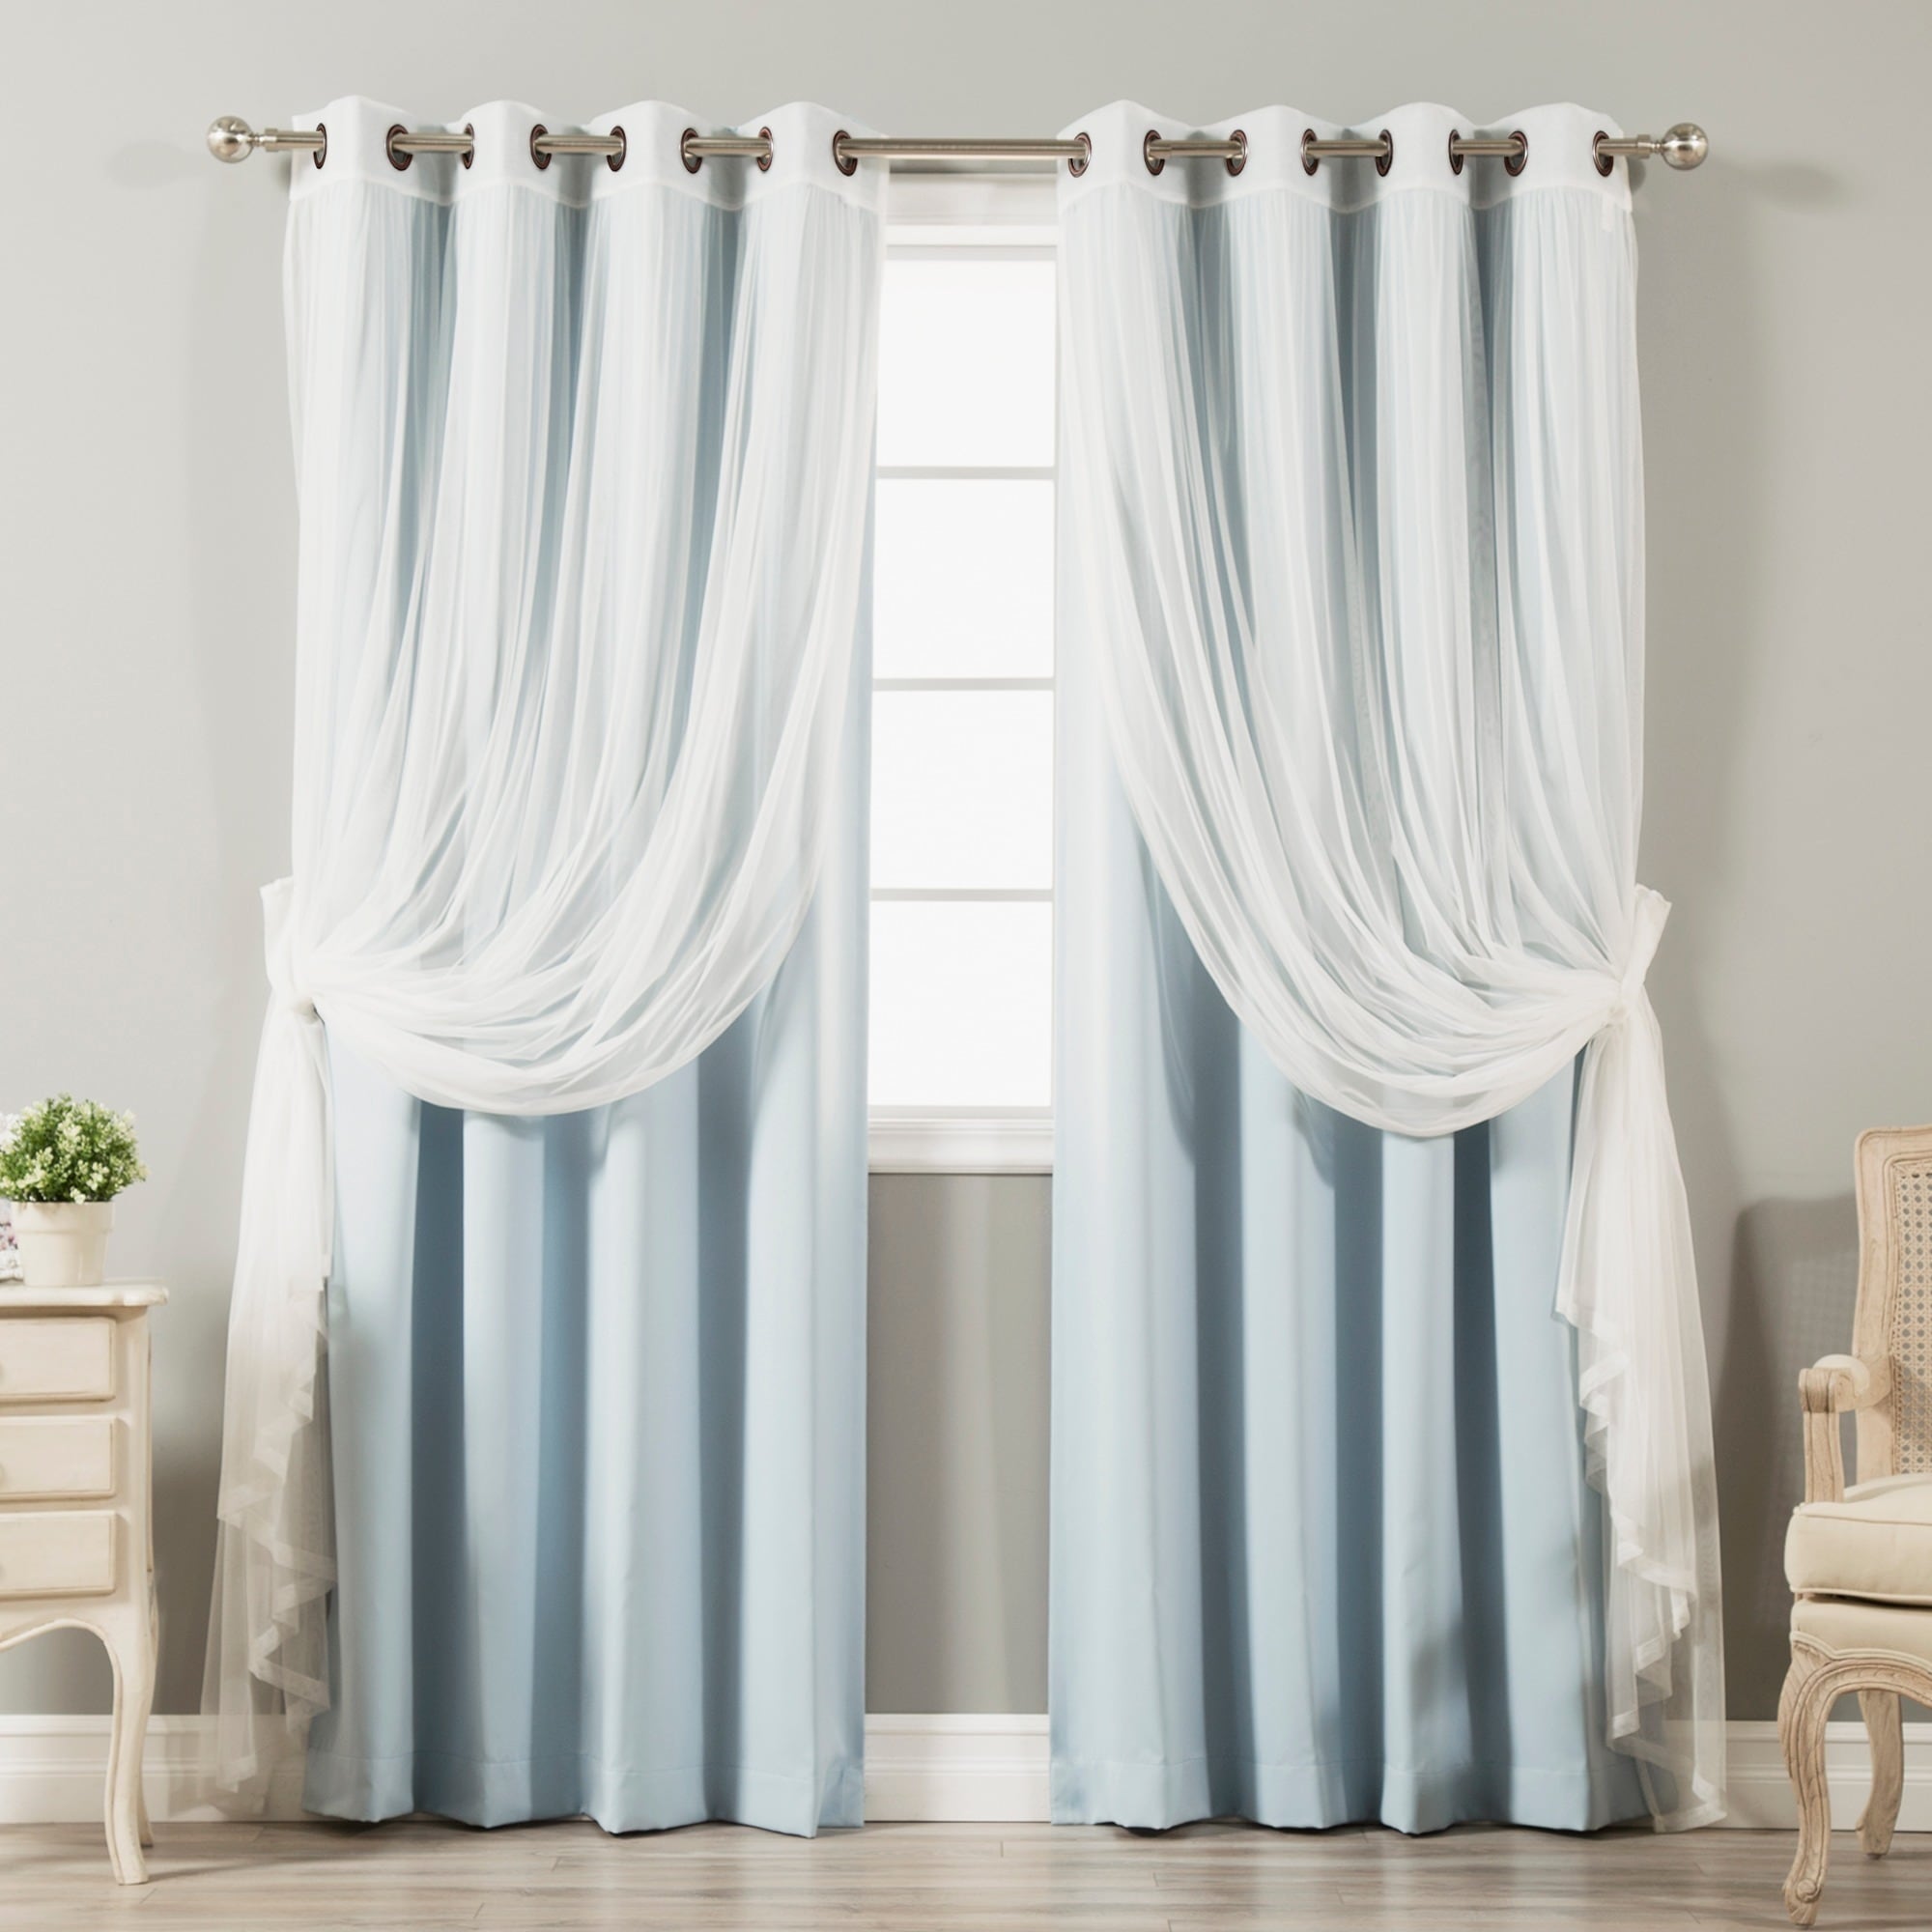 Buy Sheer Curtains Online At Overstock Our Best Window Treatments